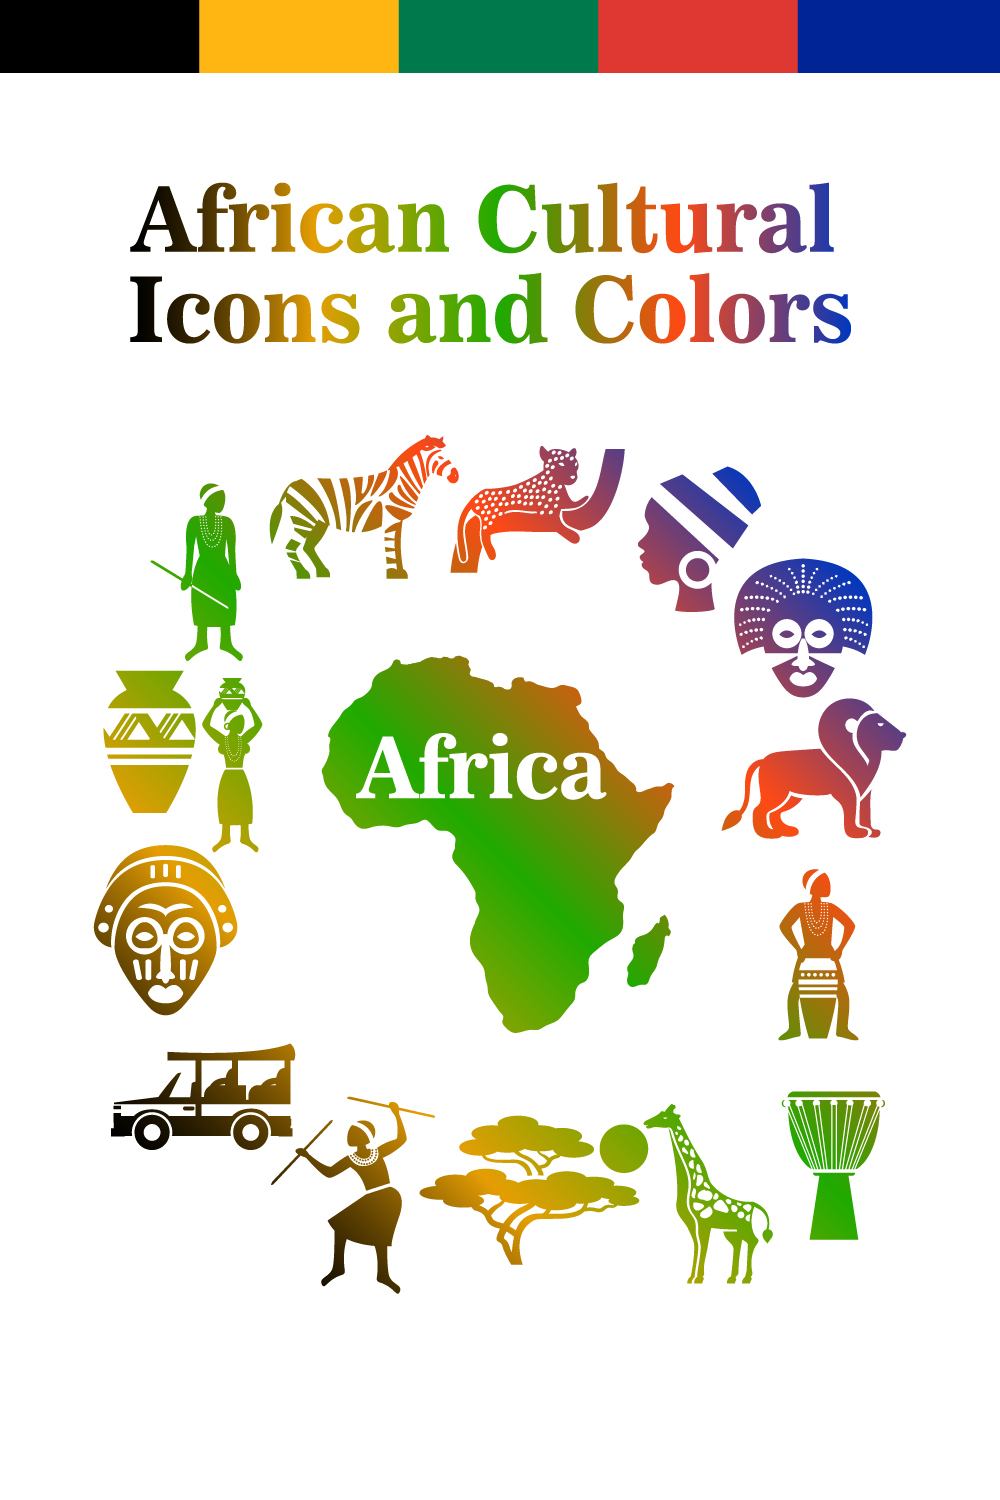 Africa Culture Signs Illustration, Icons and Colors pinterest image.